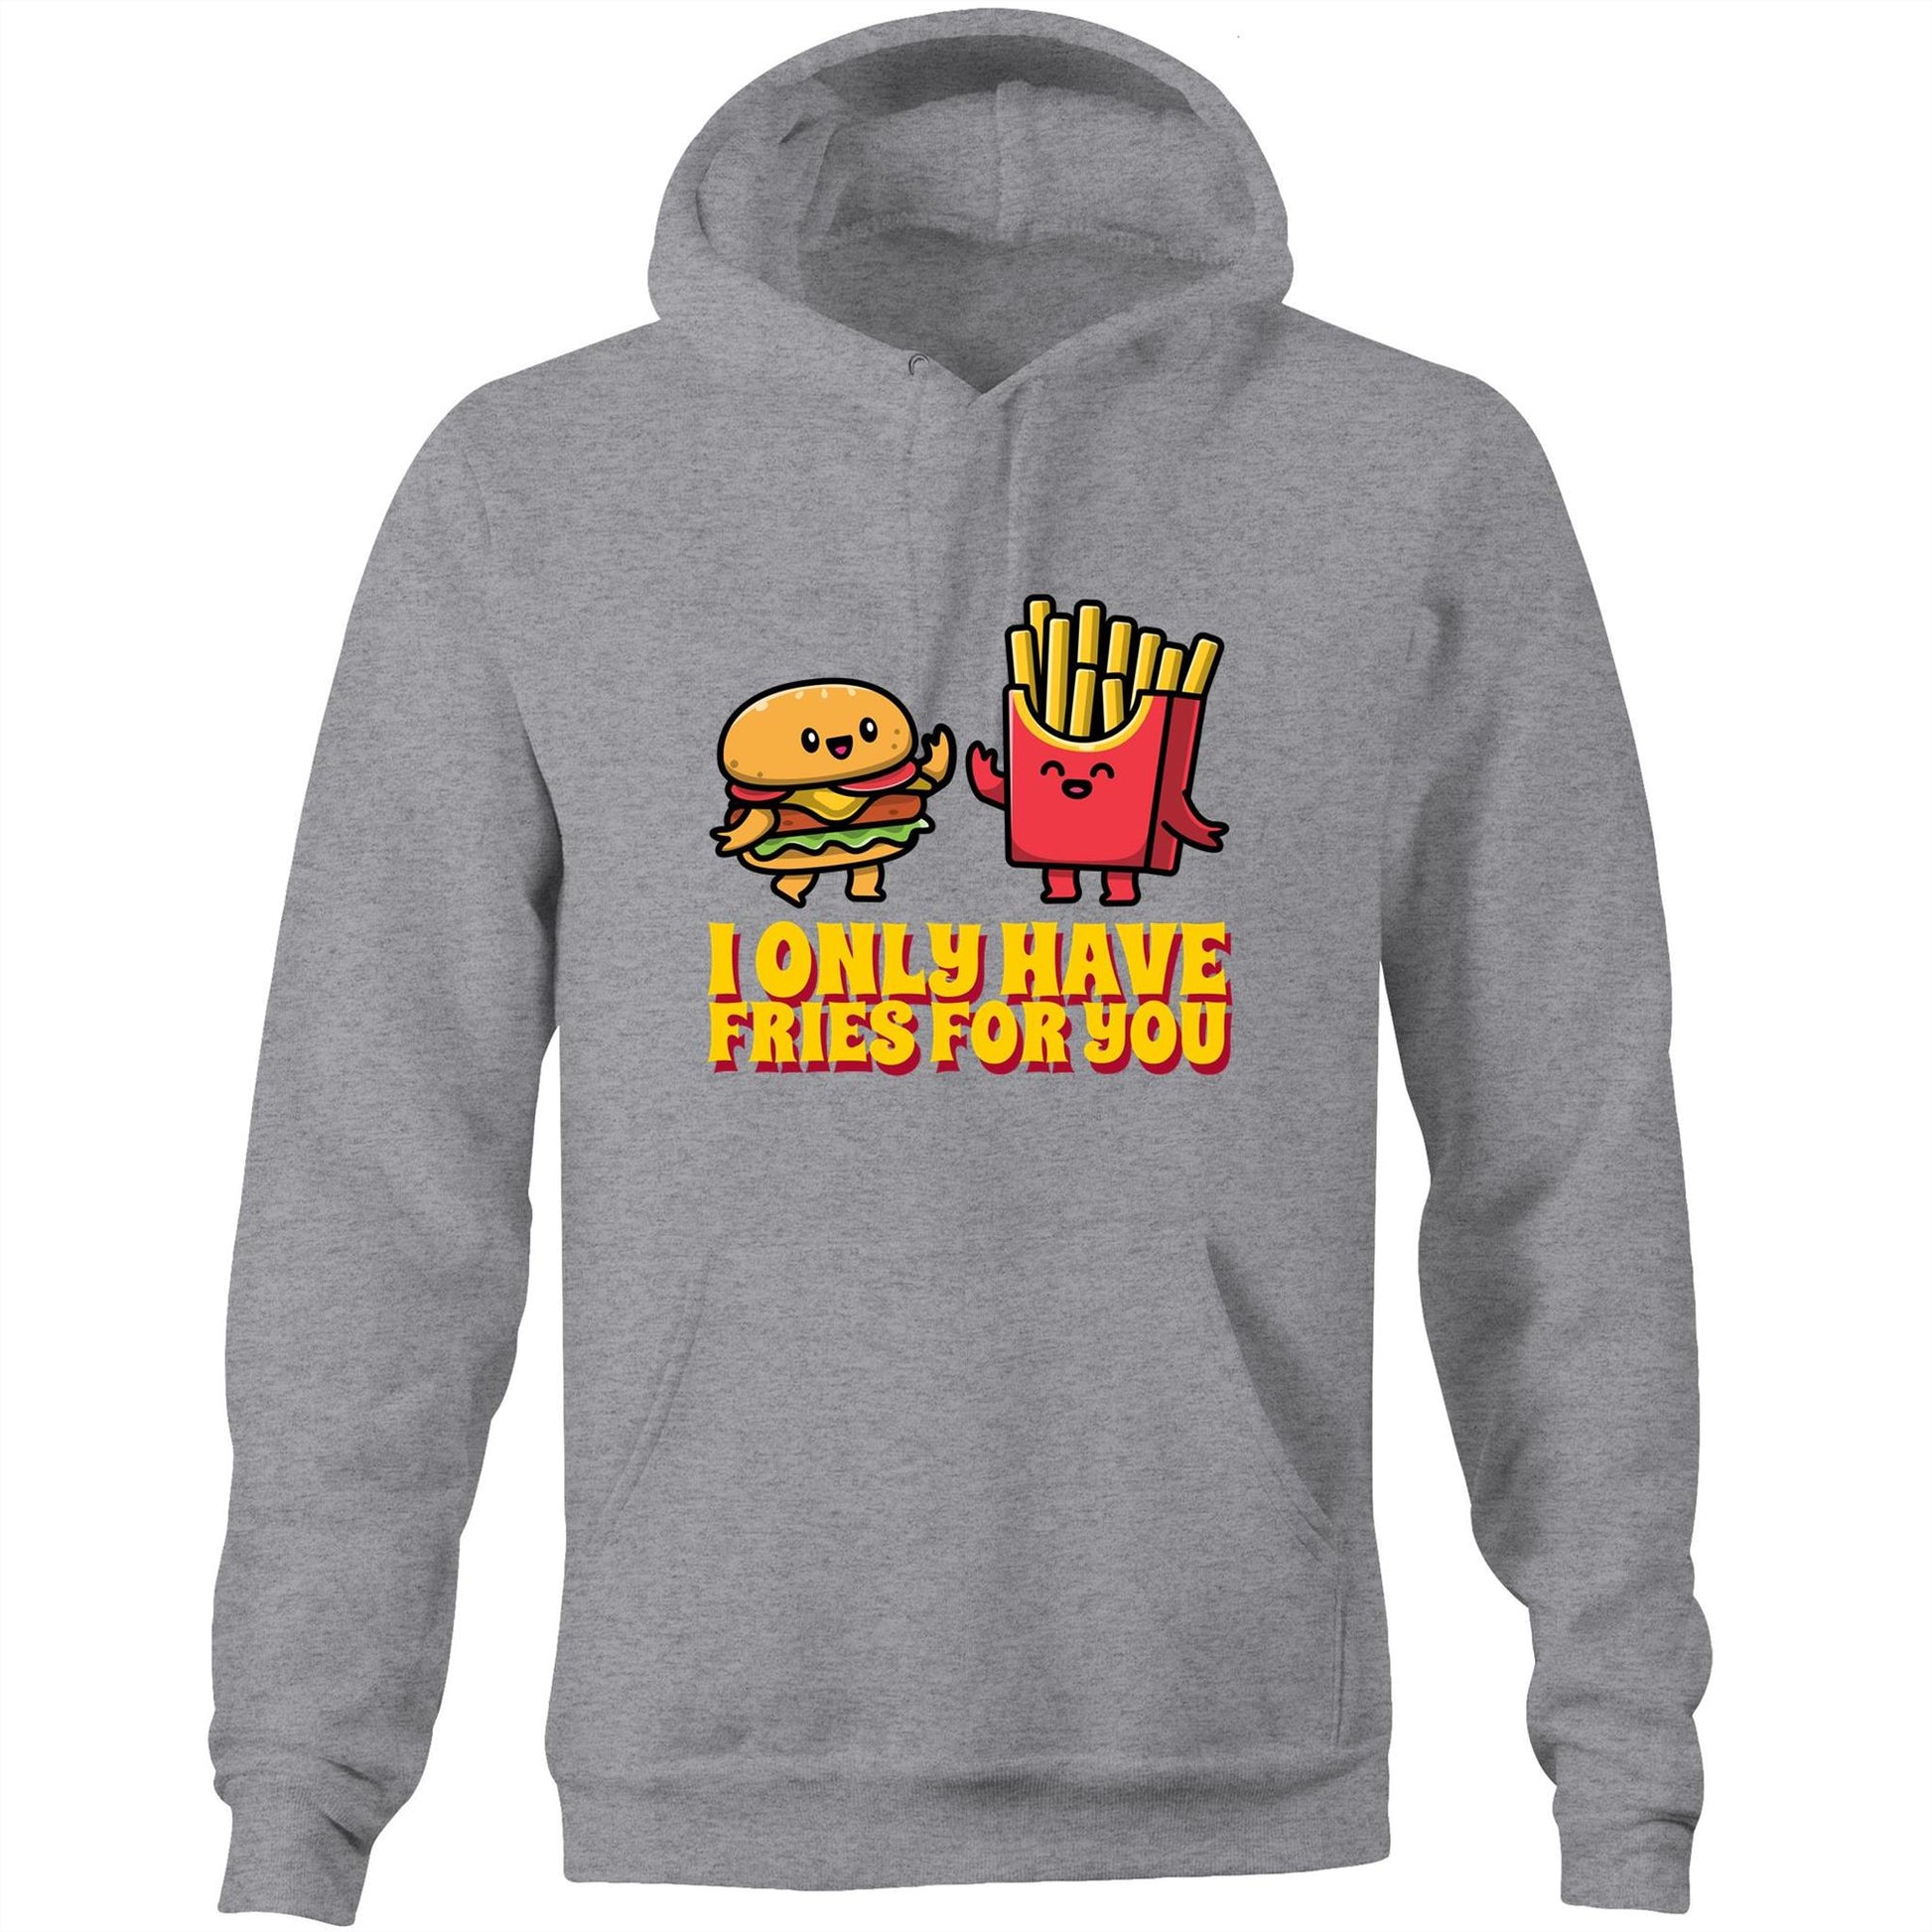 I Only Have Fries For You, Burger And Fries - Pocket Hoodie Sweatshirt Grey Marle Hoodie